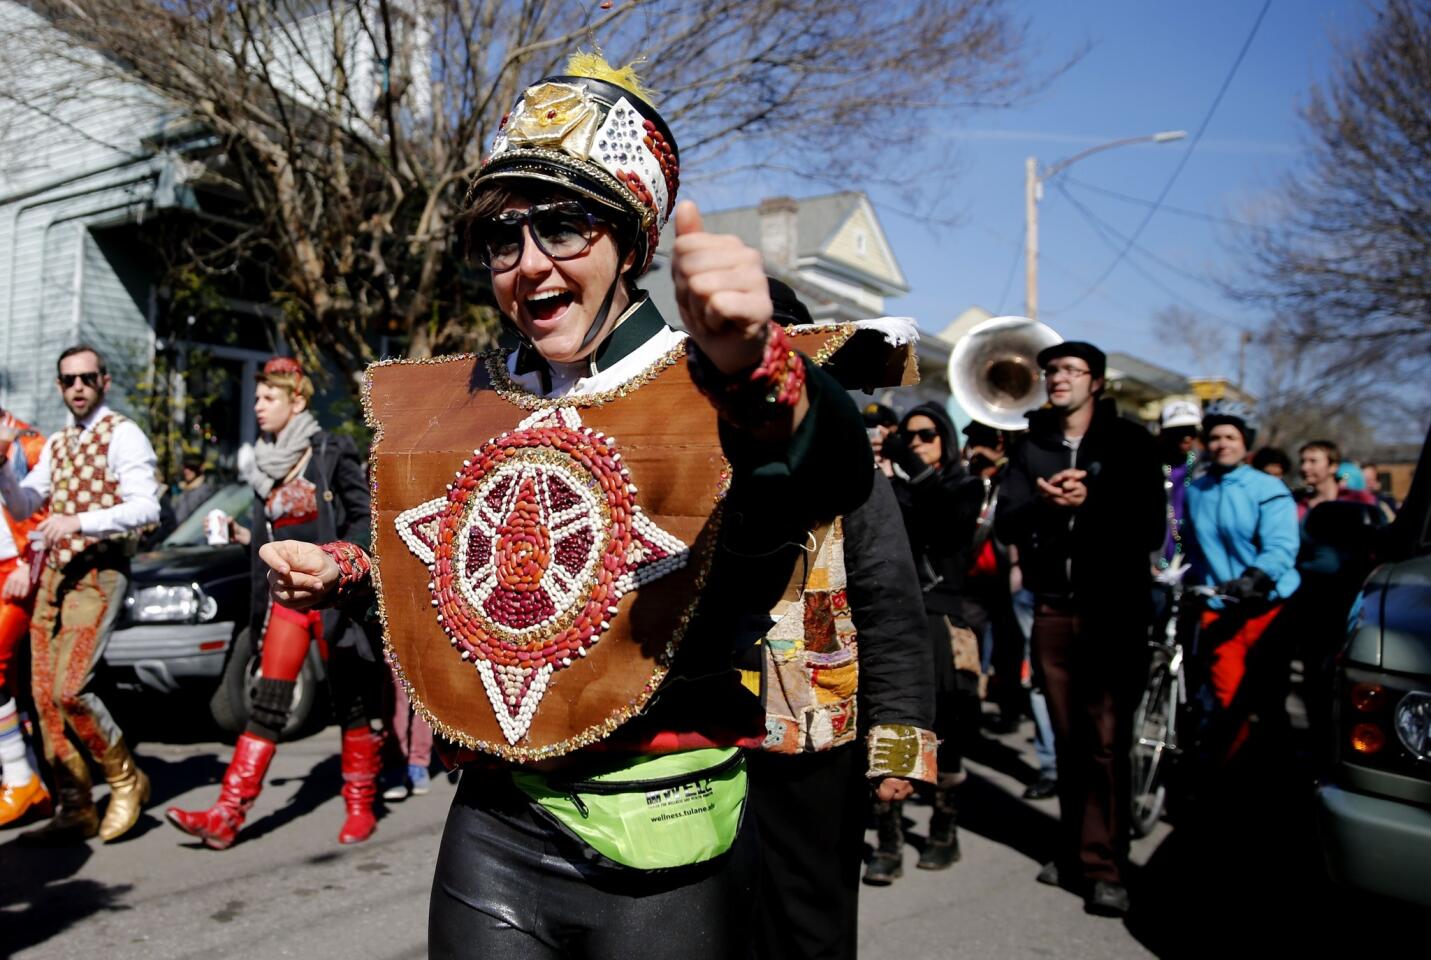 The Red Beans parade began in the Marigny neighborhood and ended in the Treme with the Treme Brass Band on Monday in New Orleans. Participants sported costumes made of various kinds of beans.